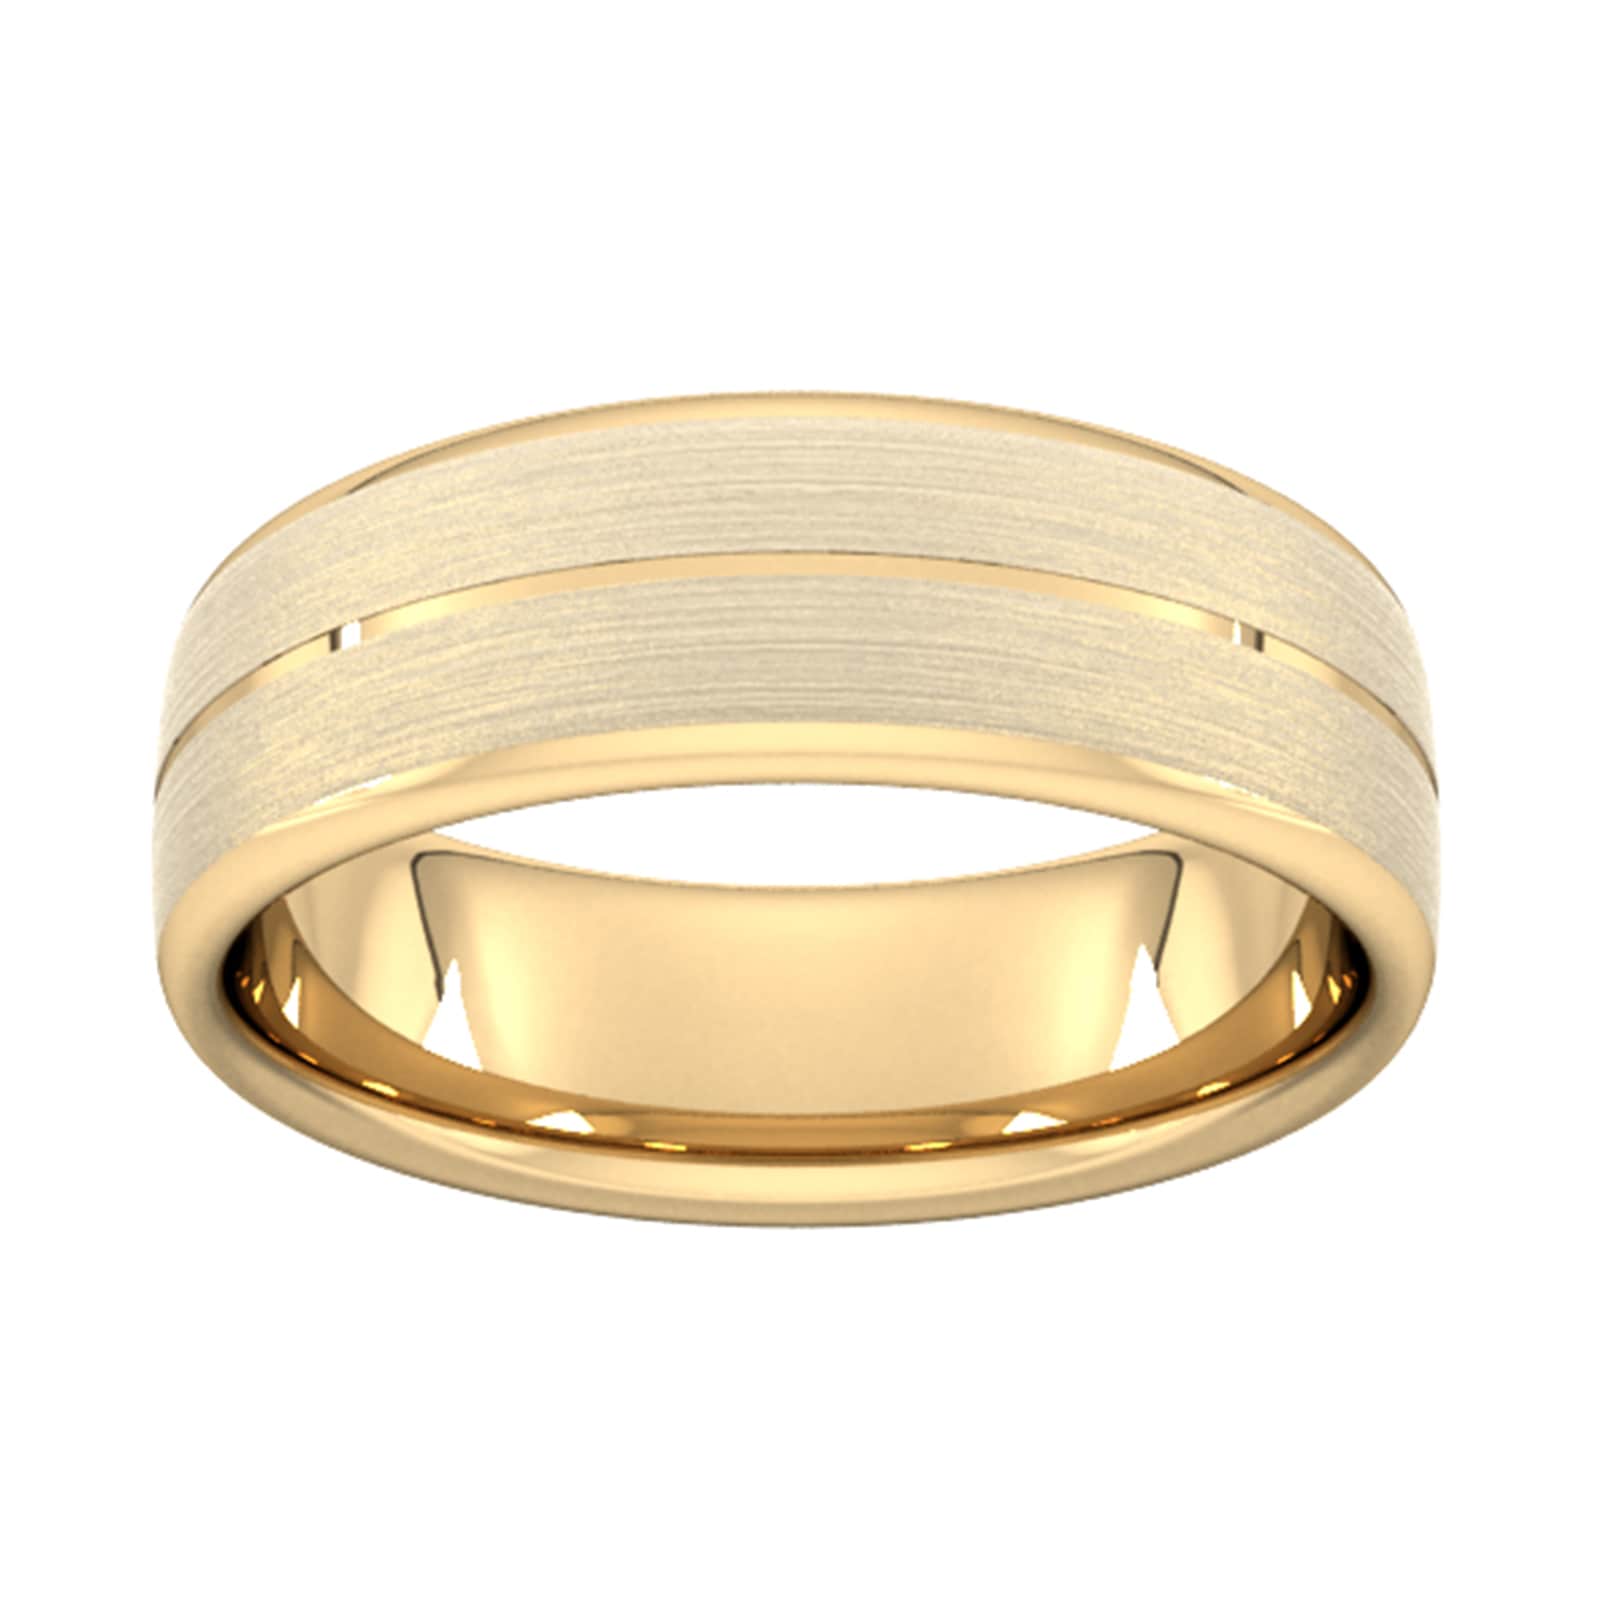 7mm D Shape Heavy Centre Groove With Chamfered Edge Wedding Ring In 18 Carat Yellow Gold - Ring Size T